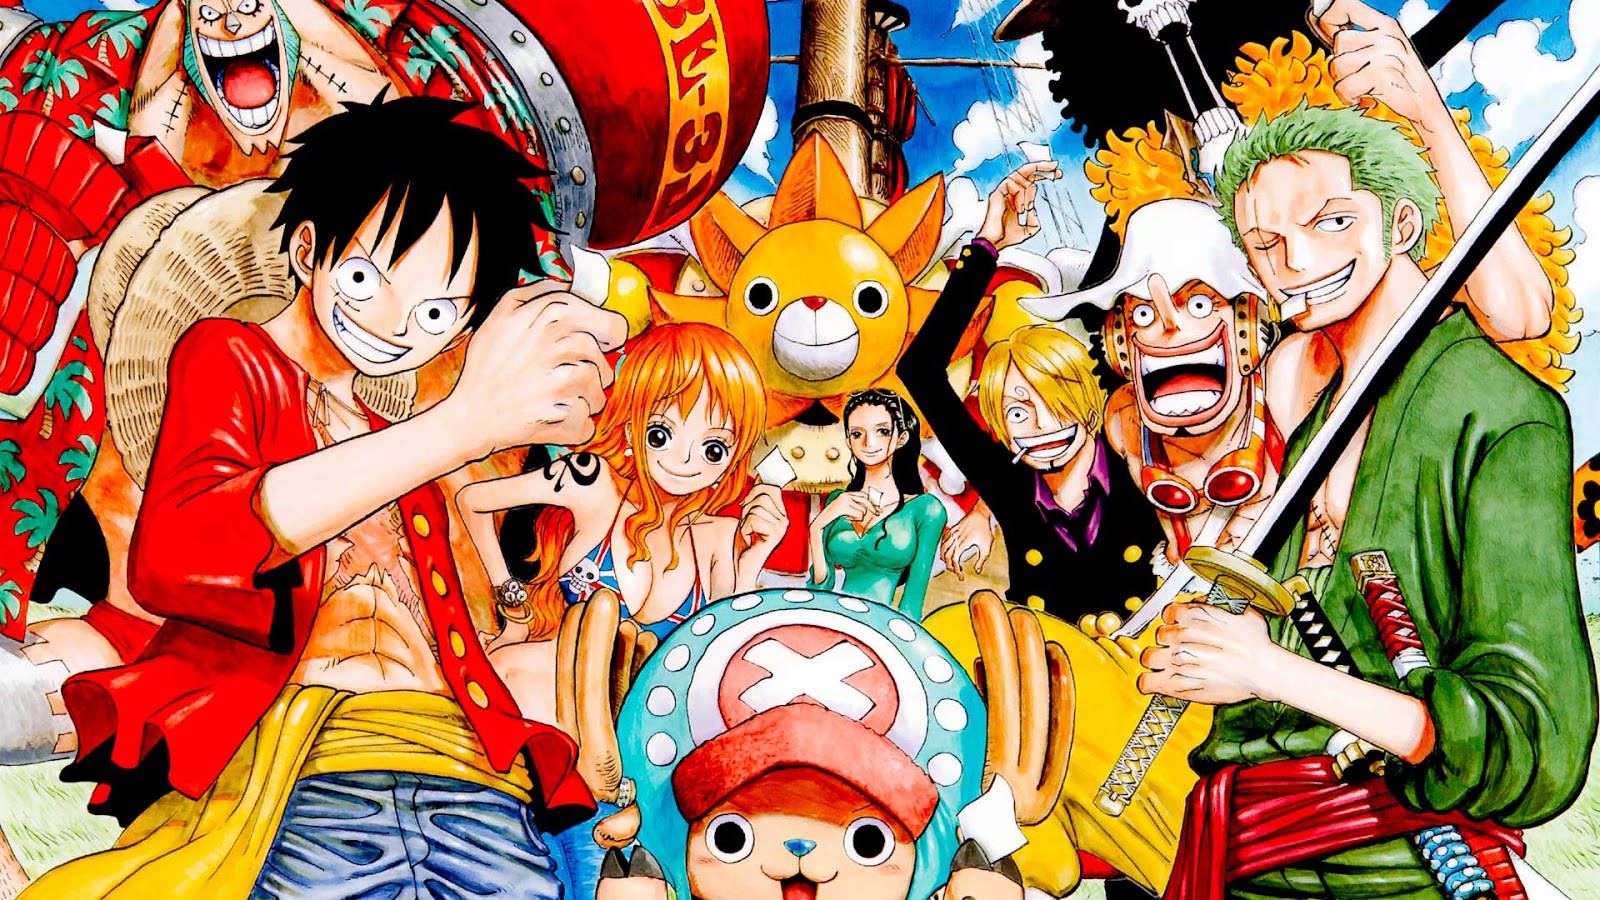 Anime One Piece And Naruto Wallpapers